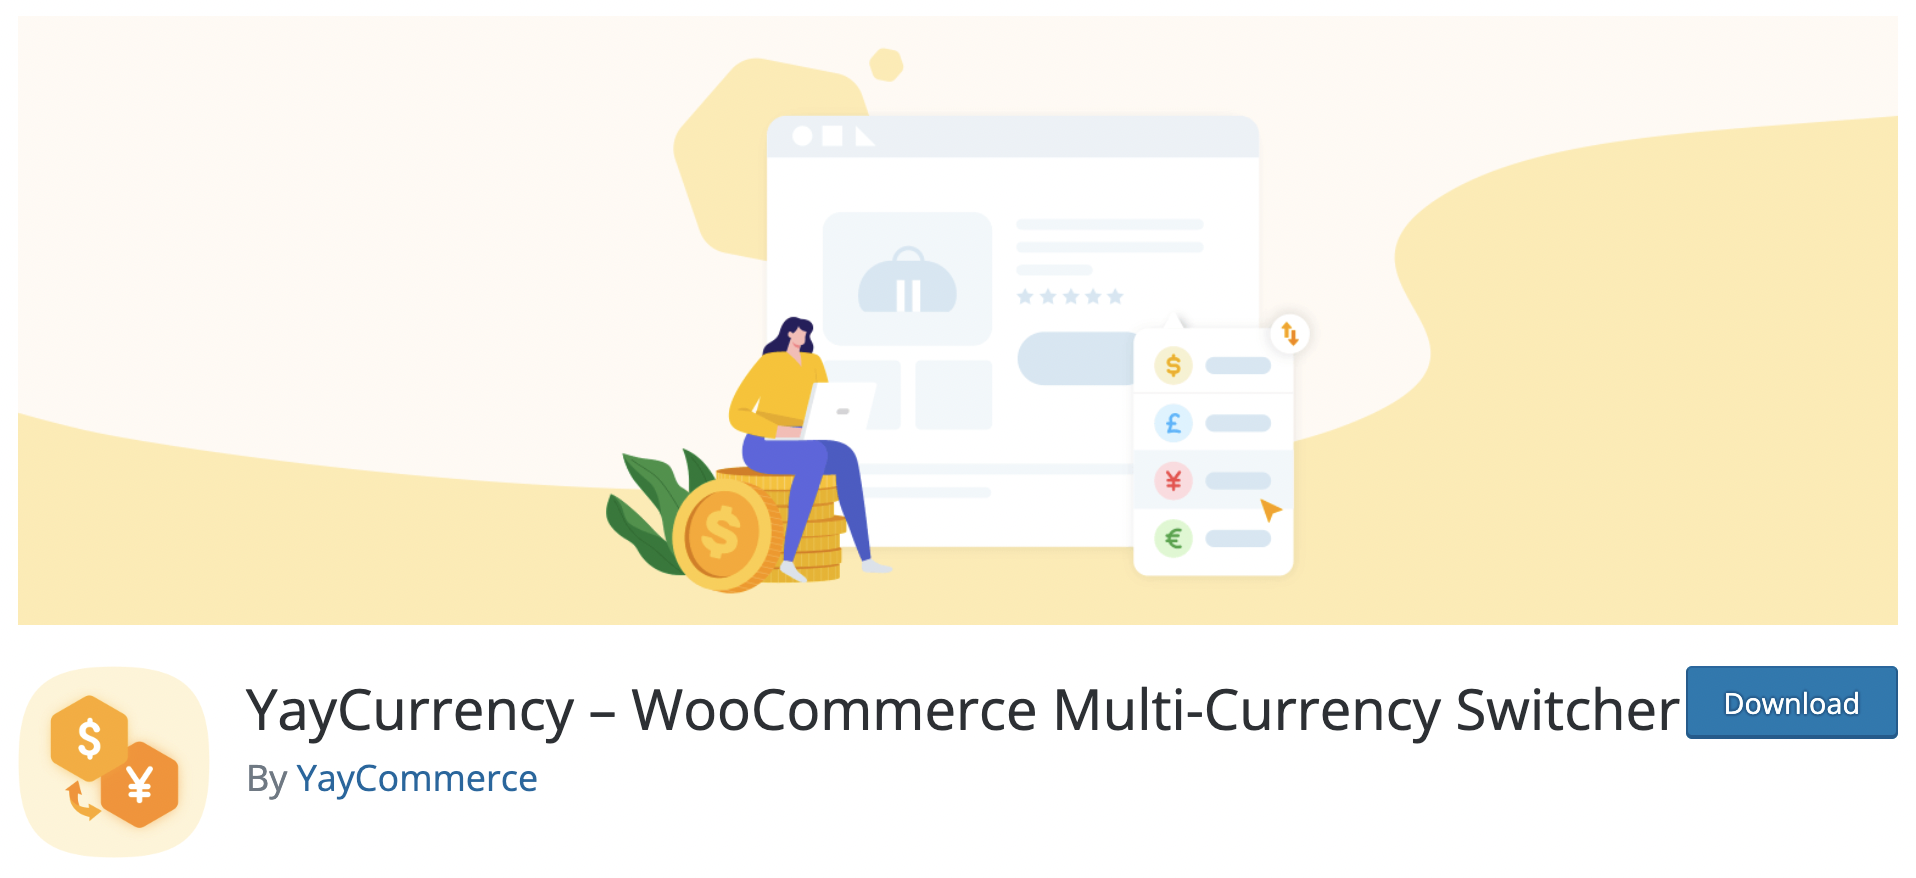 ppwp-yaycurrency-banner